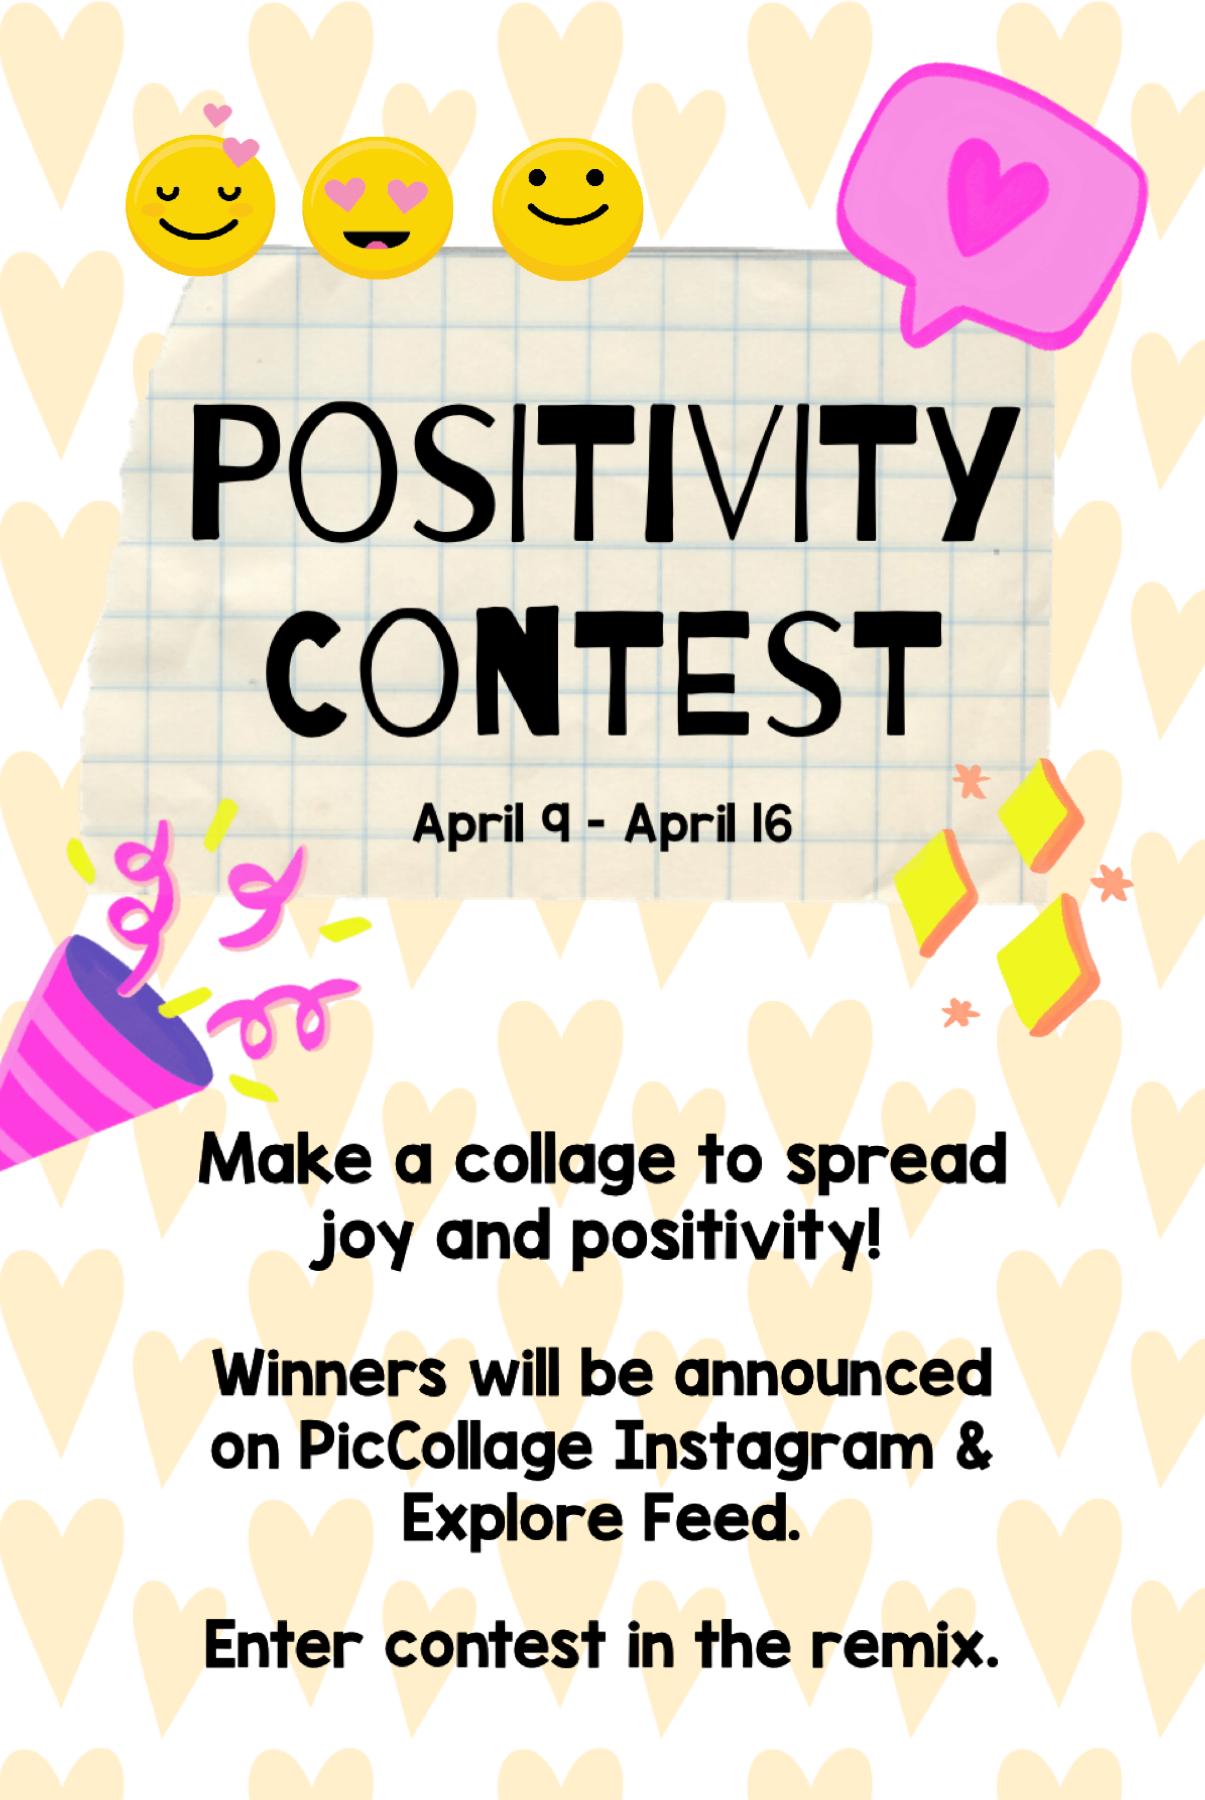 New contest is live! Submit before next Thursday 4/10. Spread some positivity ✨